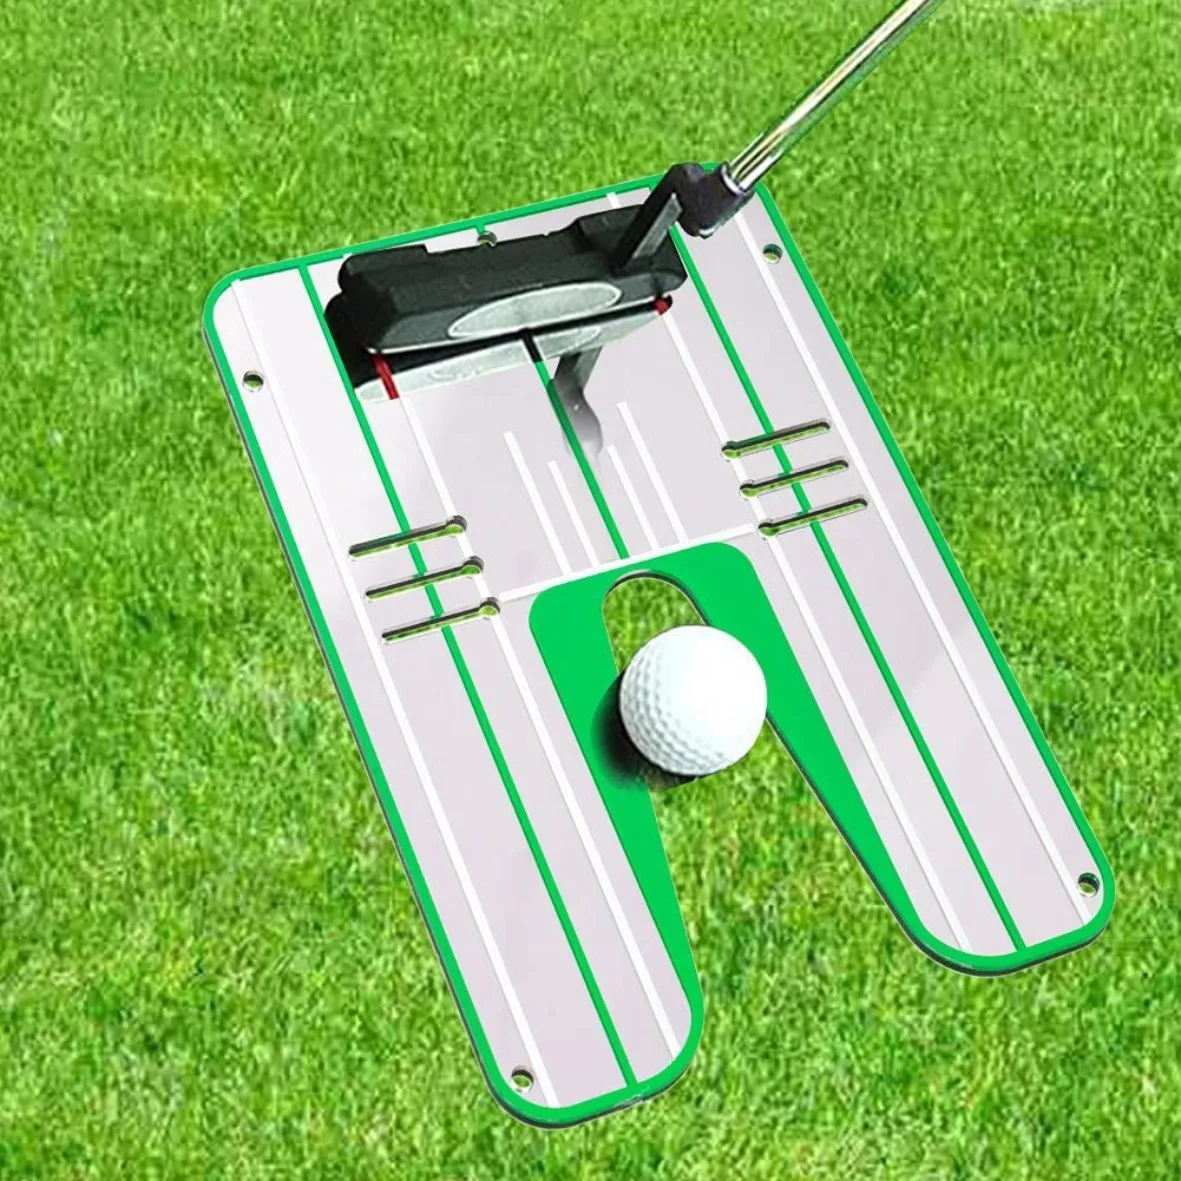 Golf Putting Alignment Mirror Acrylic Putting Practice Mirror Portable Golf Swing Training Aid Trainer For Golf Accessories